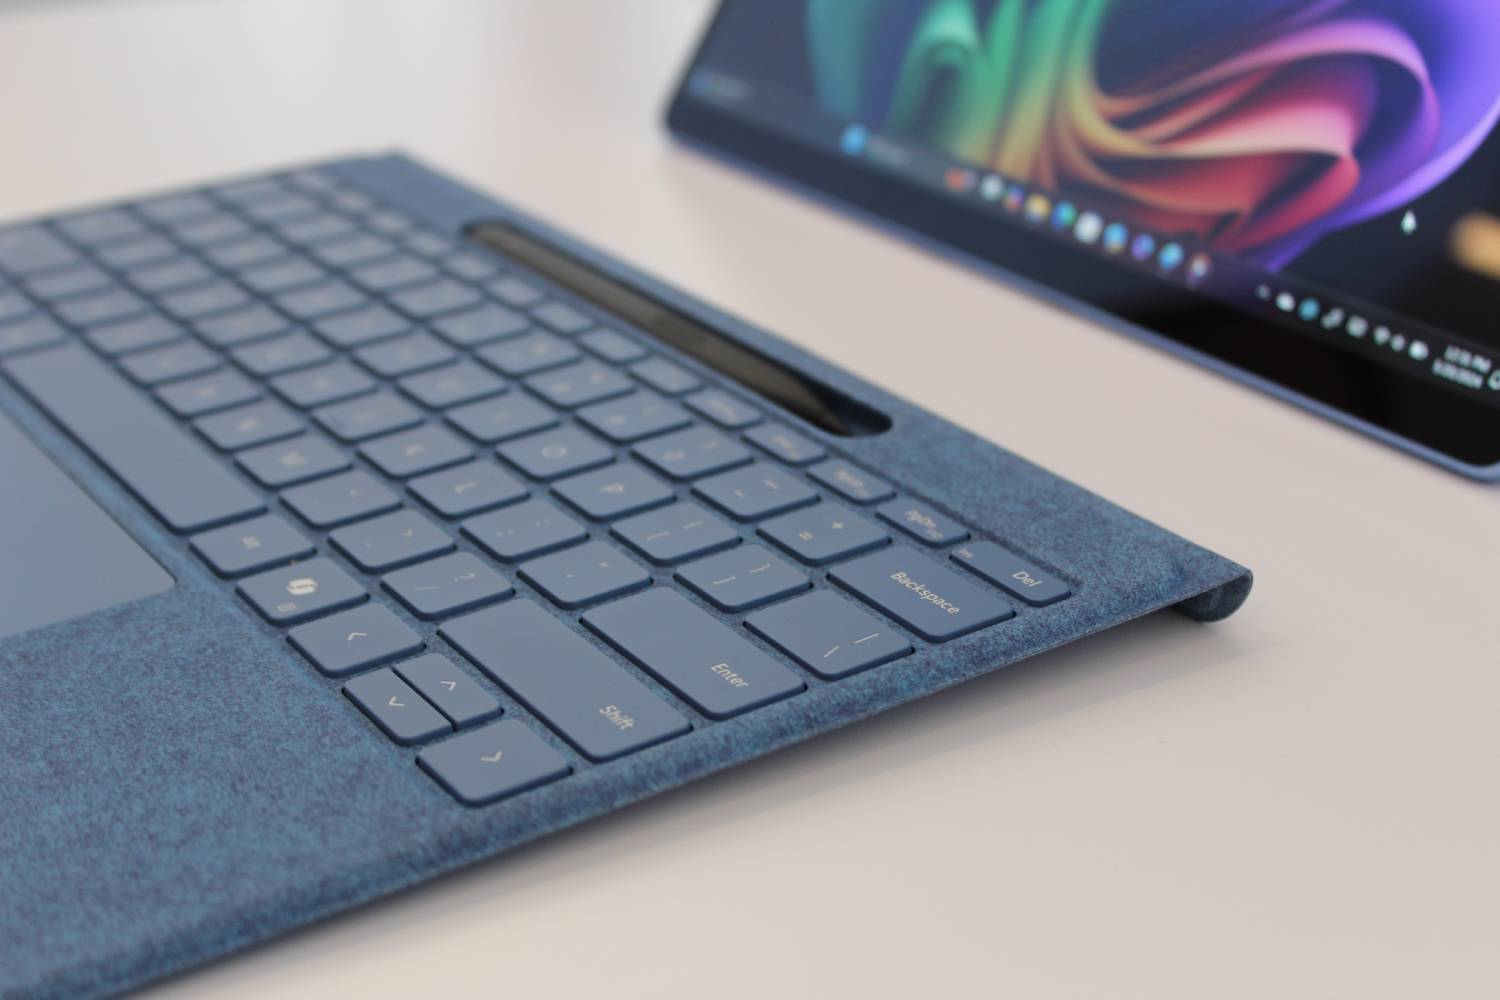 The Surface Pro keyboard detached from the tablet.